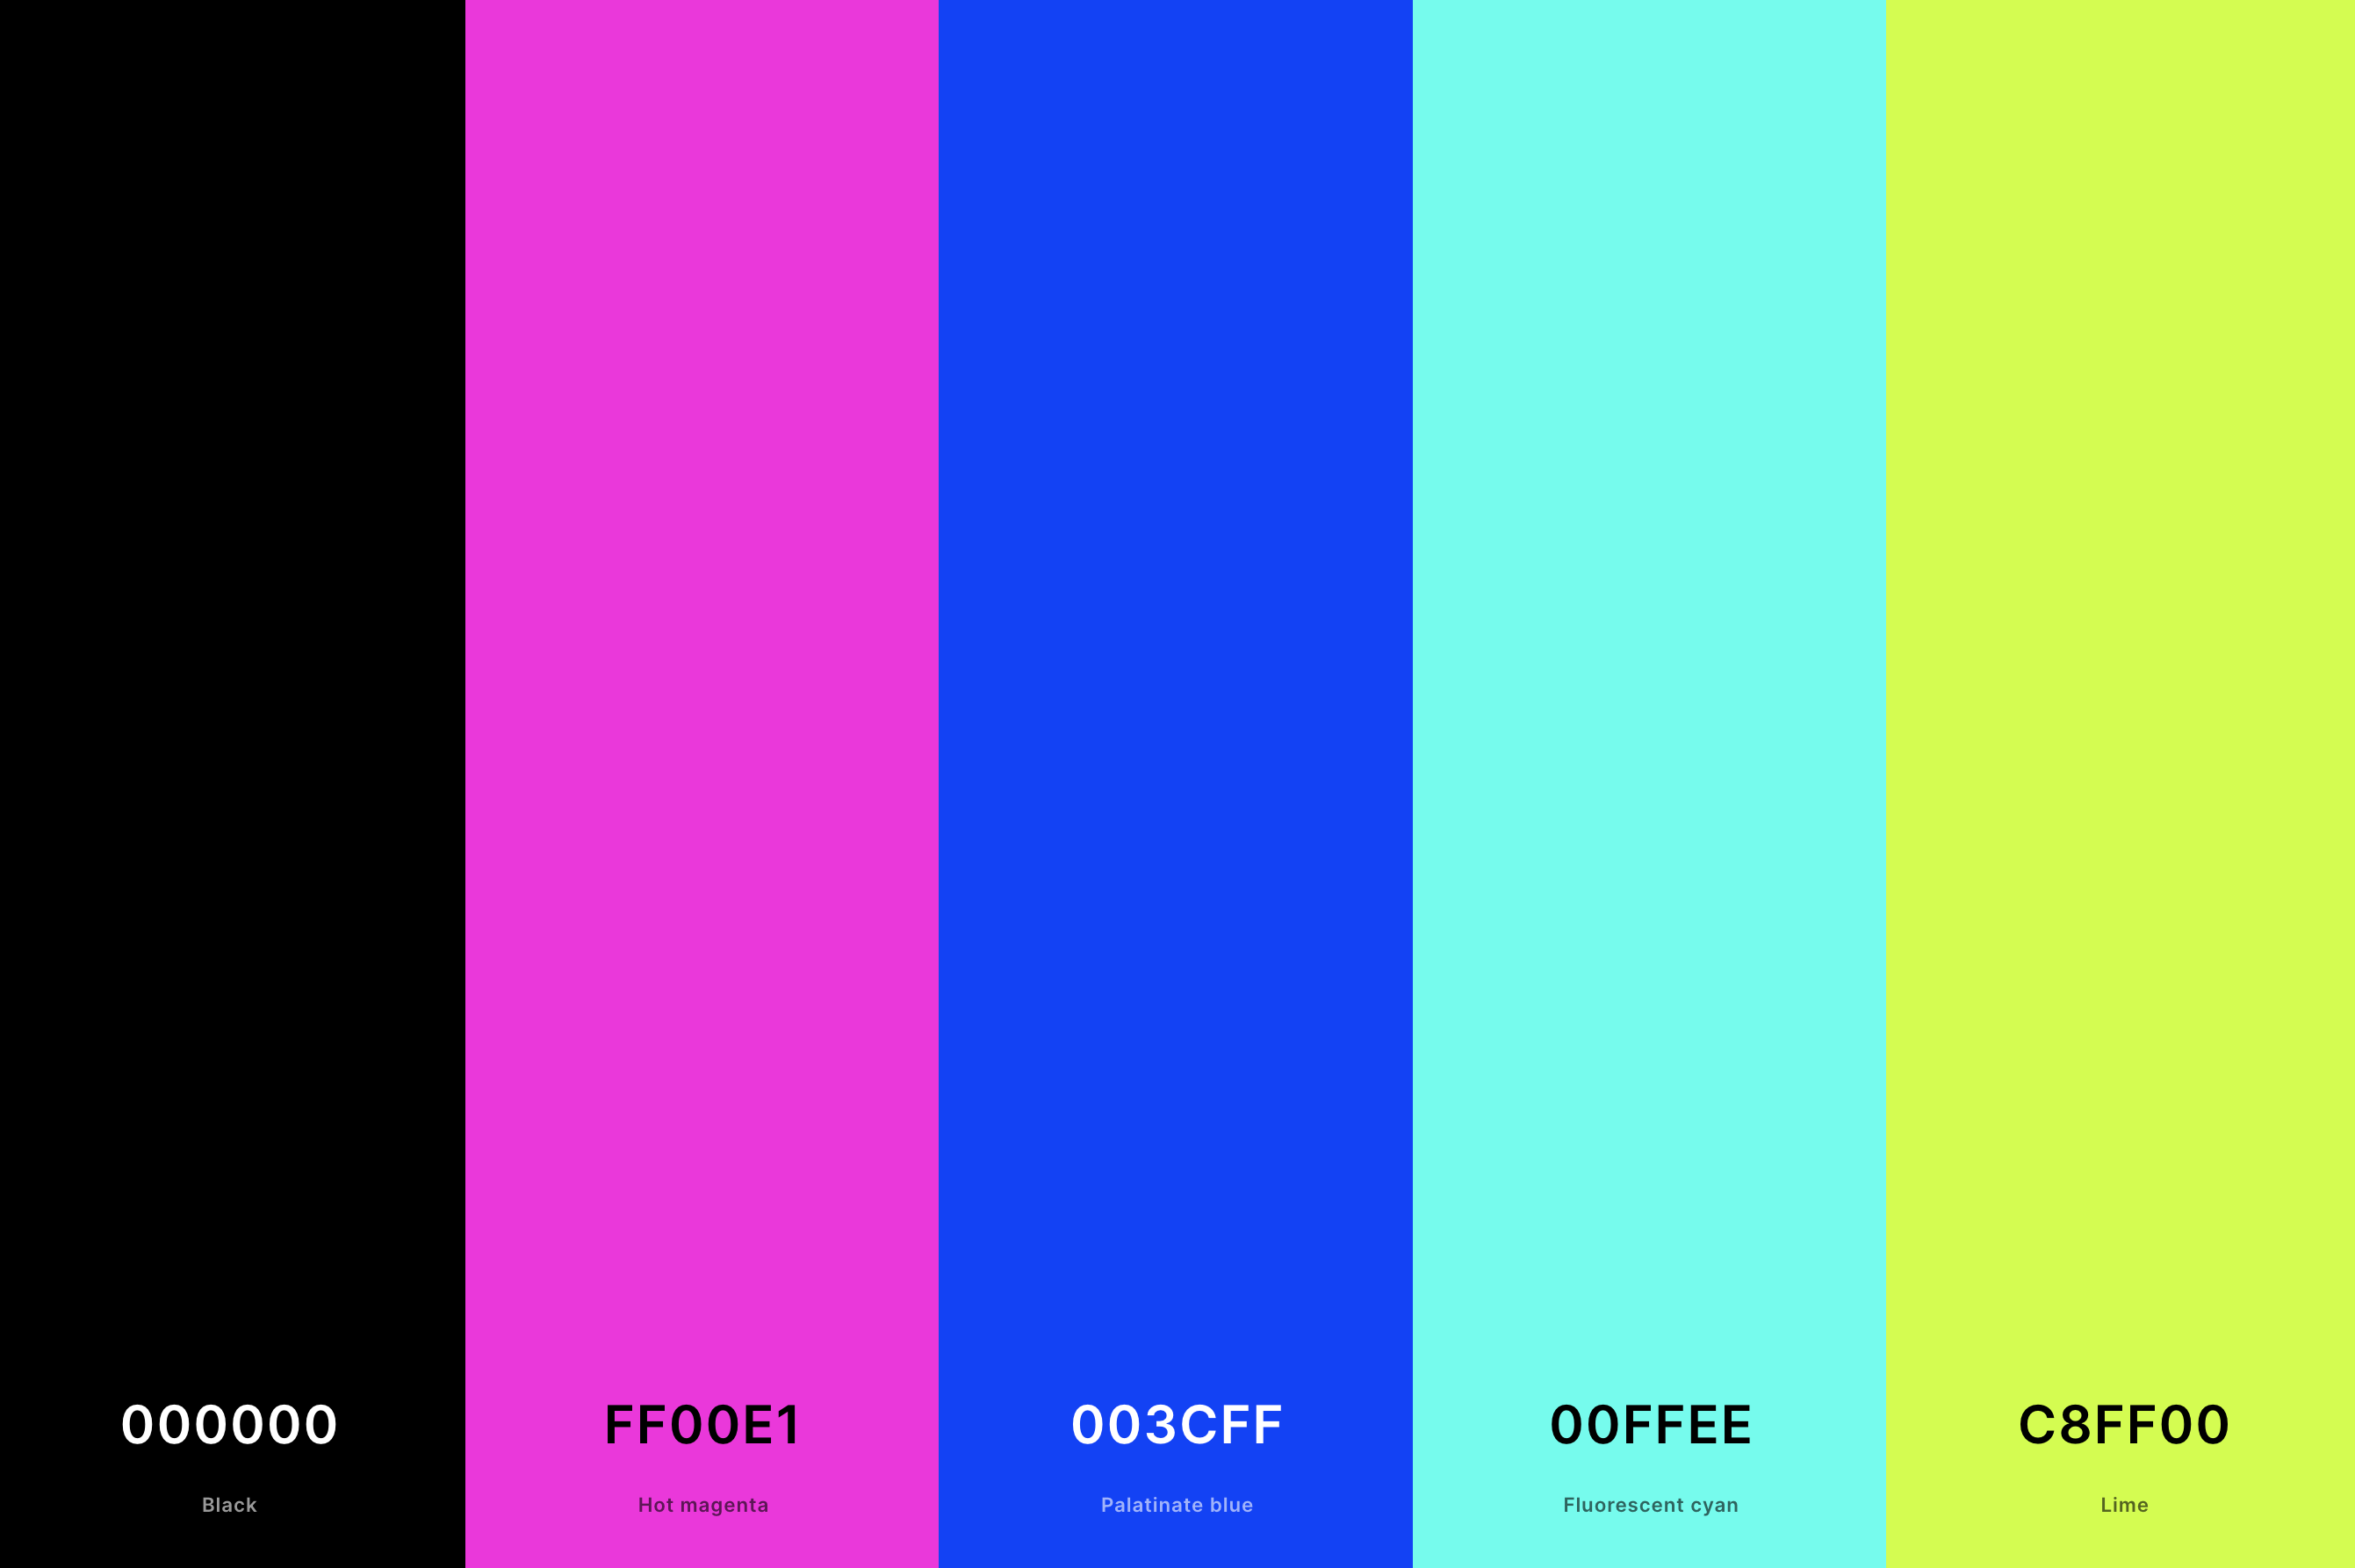 21. Black And Neon Color Palette Color Palette with Black (Hex #000000) + Hot Magenta (Hex #FF00E1) + Palatinate Blue (Hex #003CFF) + Fluorescent Cyan (Hex #00FFEE) + Lime (Hex #C8FF00) Color Palette with Hex Codes